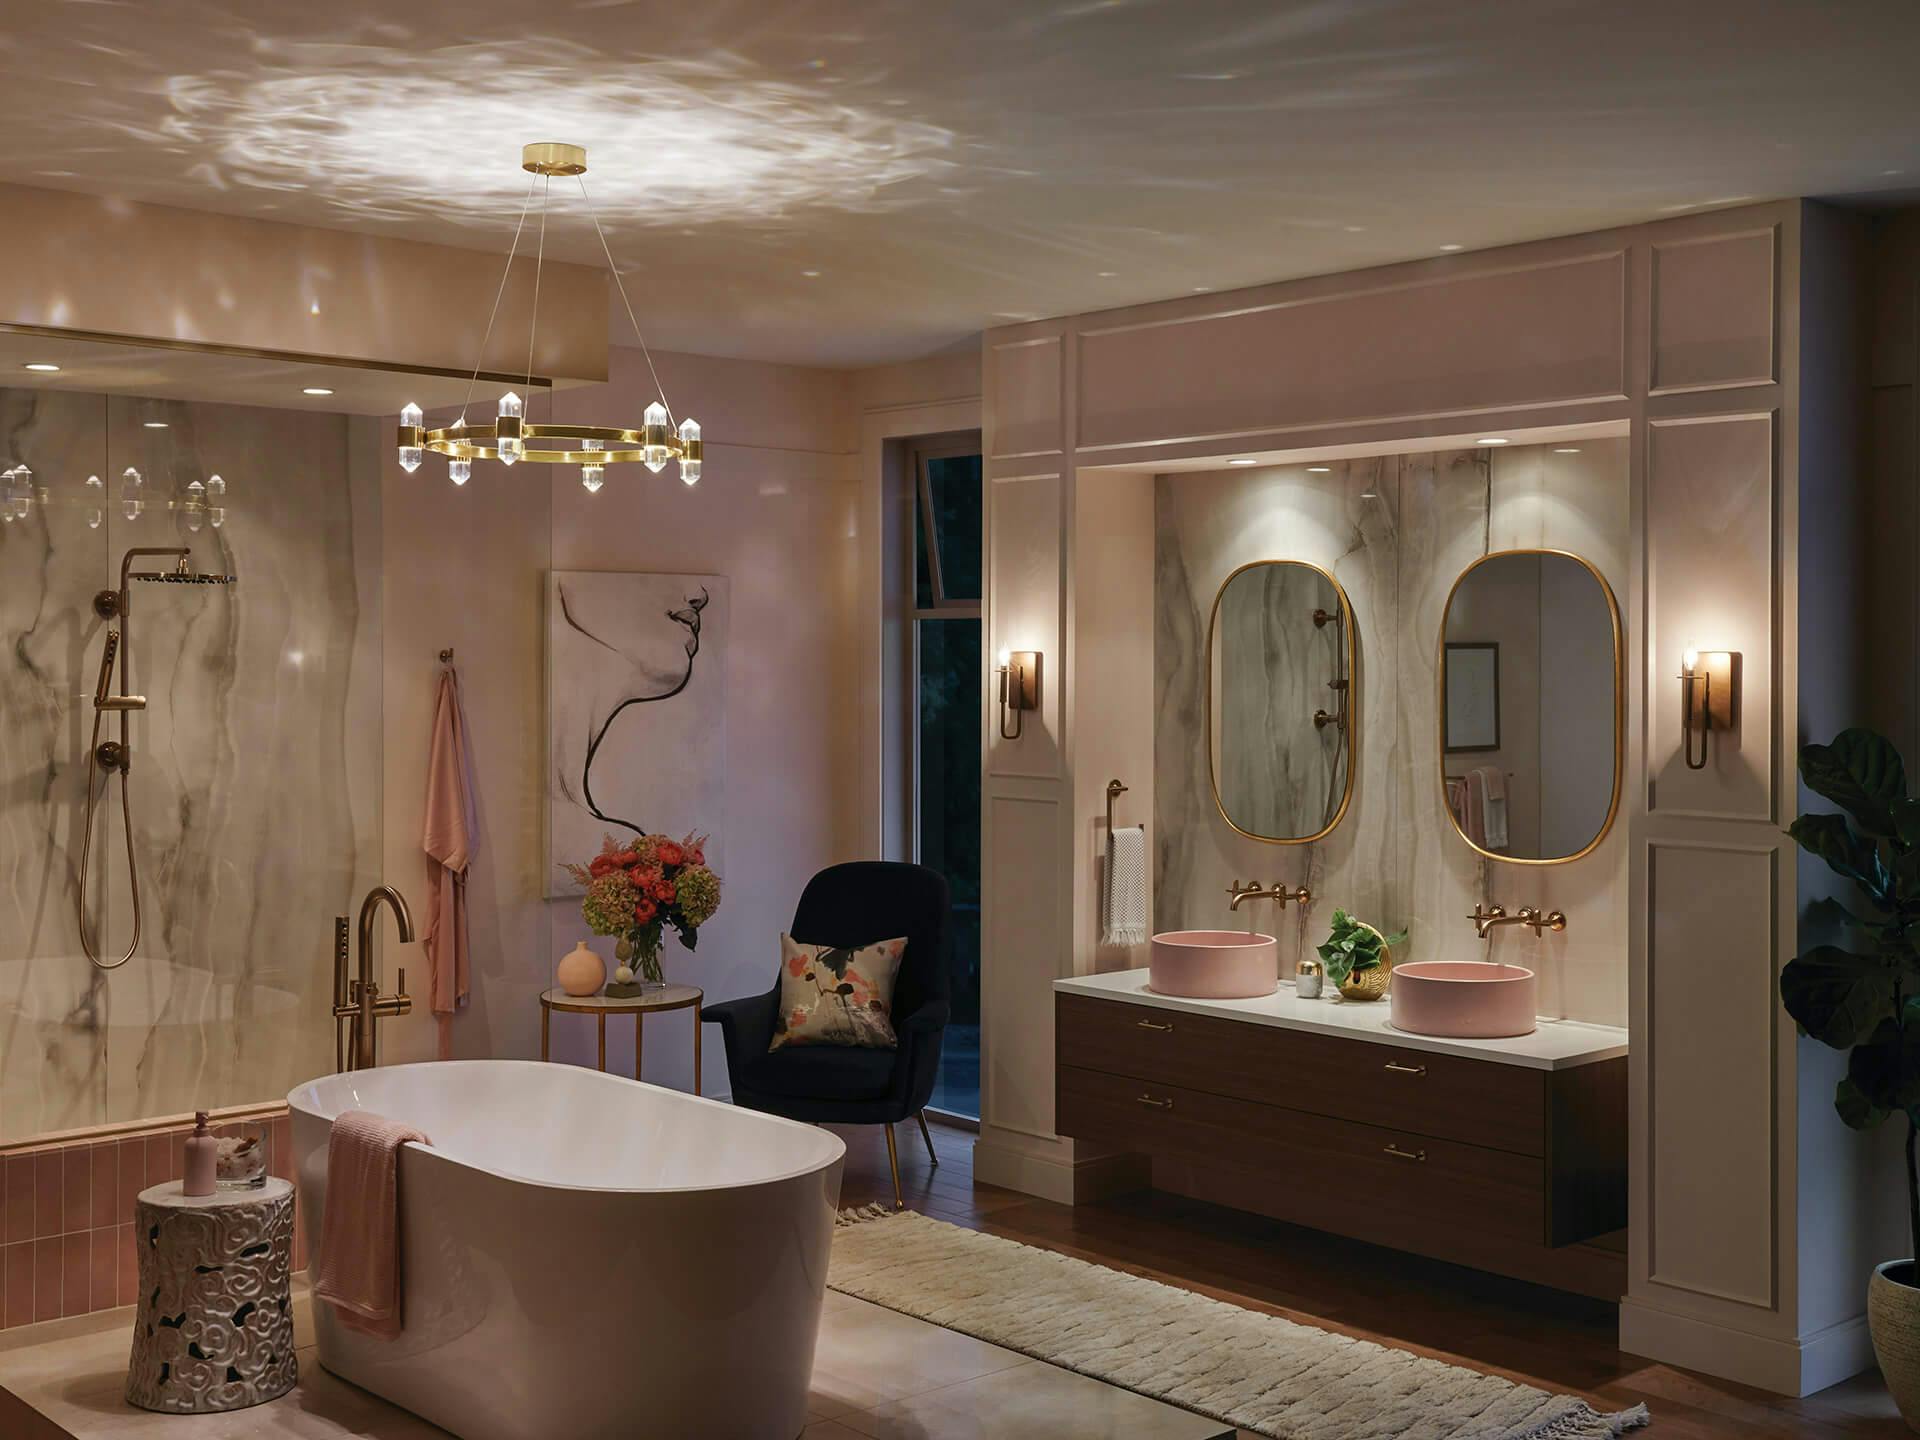 Evening luxurious pink bathroom with a tub in the middle of the room featuring an Arabella chandelier at night